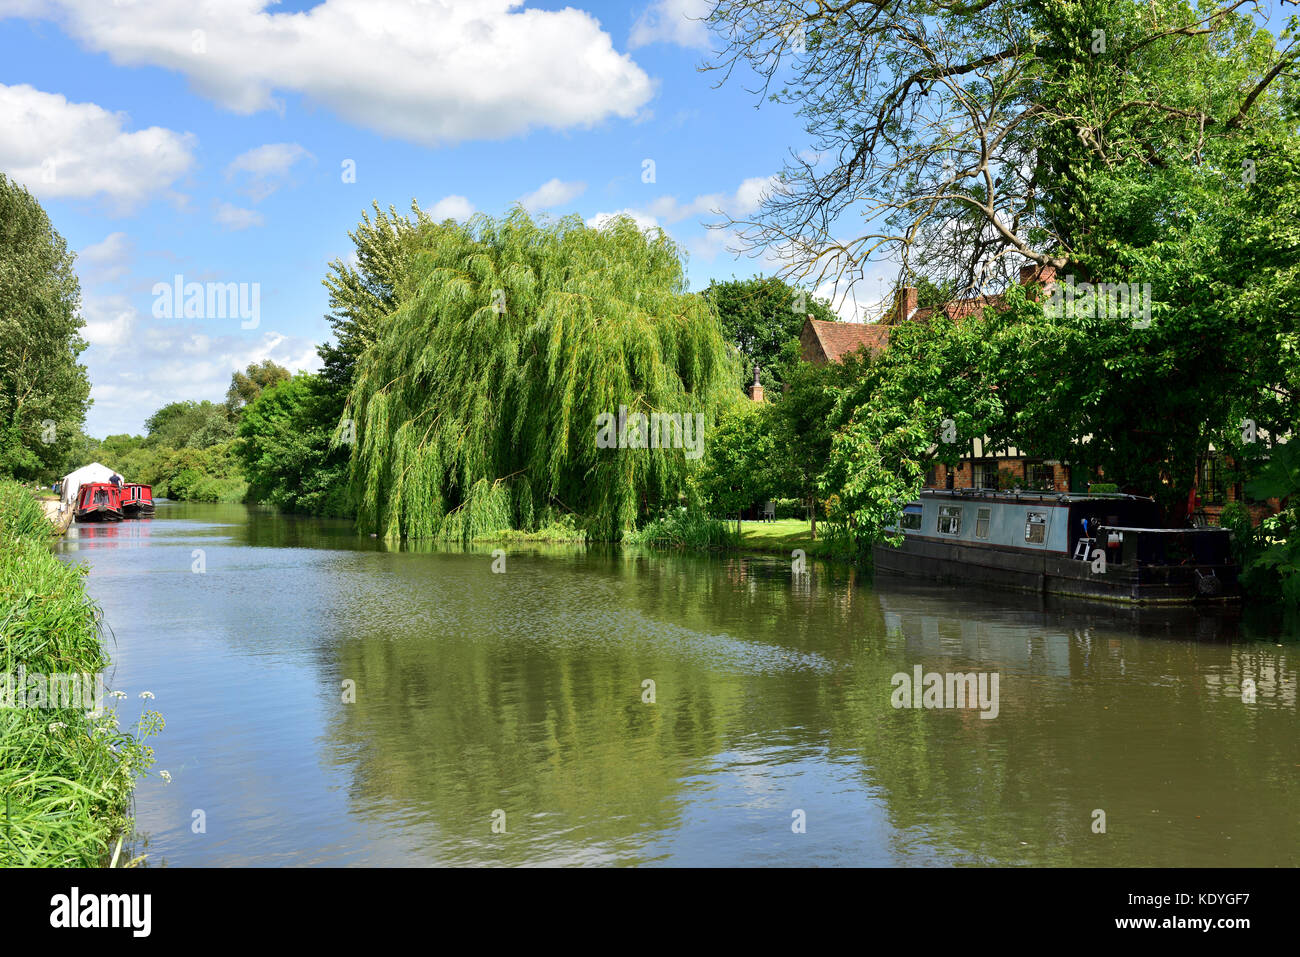 River with trees and canal boats along its banks, UK Stock Photo